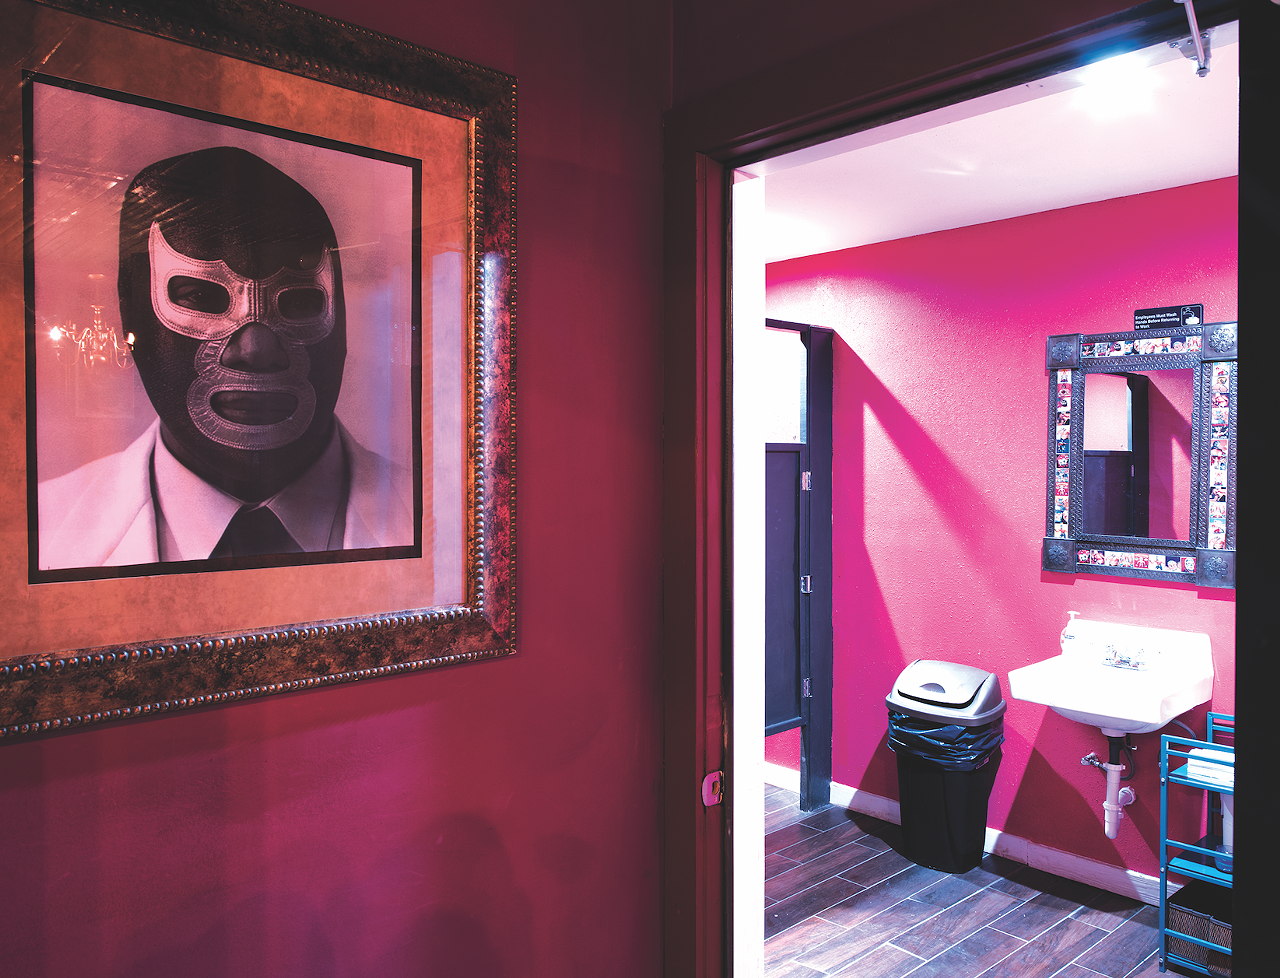 El Luchador // This Southside gem blends craft beers, funky cocktails with a kitschy Mexican wrestler theme that gels with neighbors young and old. From Luchador masks hanging over the bar, to luchador paintings, posters and artwork on the walls, you’ll want to admire every single detail on your way to the restroom. With magenta-colored walls and spacious stalls, the women’s restroom is one you won’t have a problem using. There’s a long mirror to make sure your outfit is on point and mirrors at each sink that are bordered with tiles of different cartoon-wrestlers. What makes this restroom even better, is a basket full of feminine products available gratis for those pesky emergencies. The men’s restroom is smaller but has the same wrestler-lined tile and a clean stall with a “El Demonio Azul” wrestler poster watching your six. 622 Roosevelt Ave., (210) 272-0016, facebook.com/luchadorbarsa.